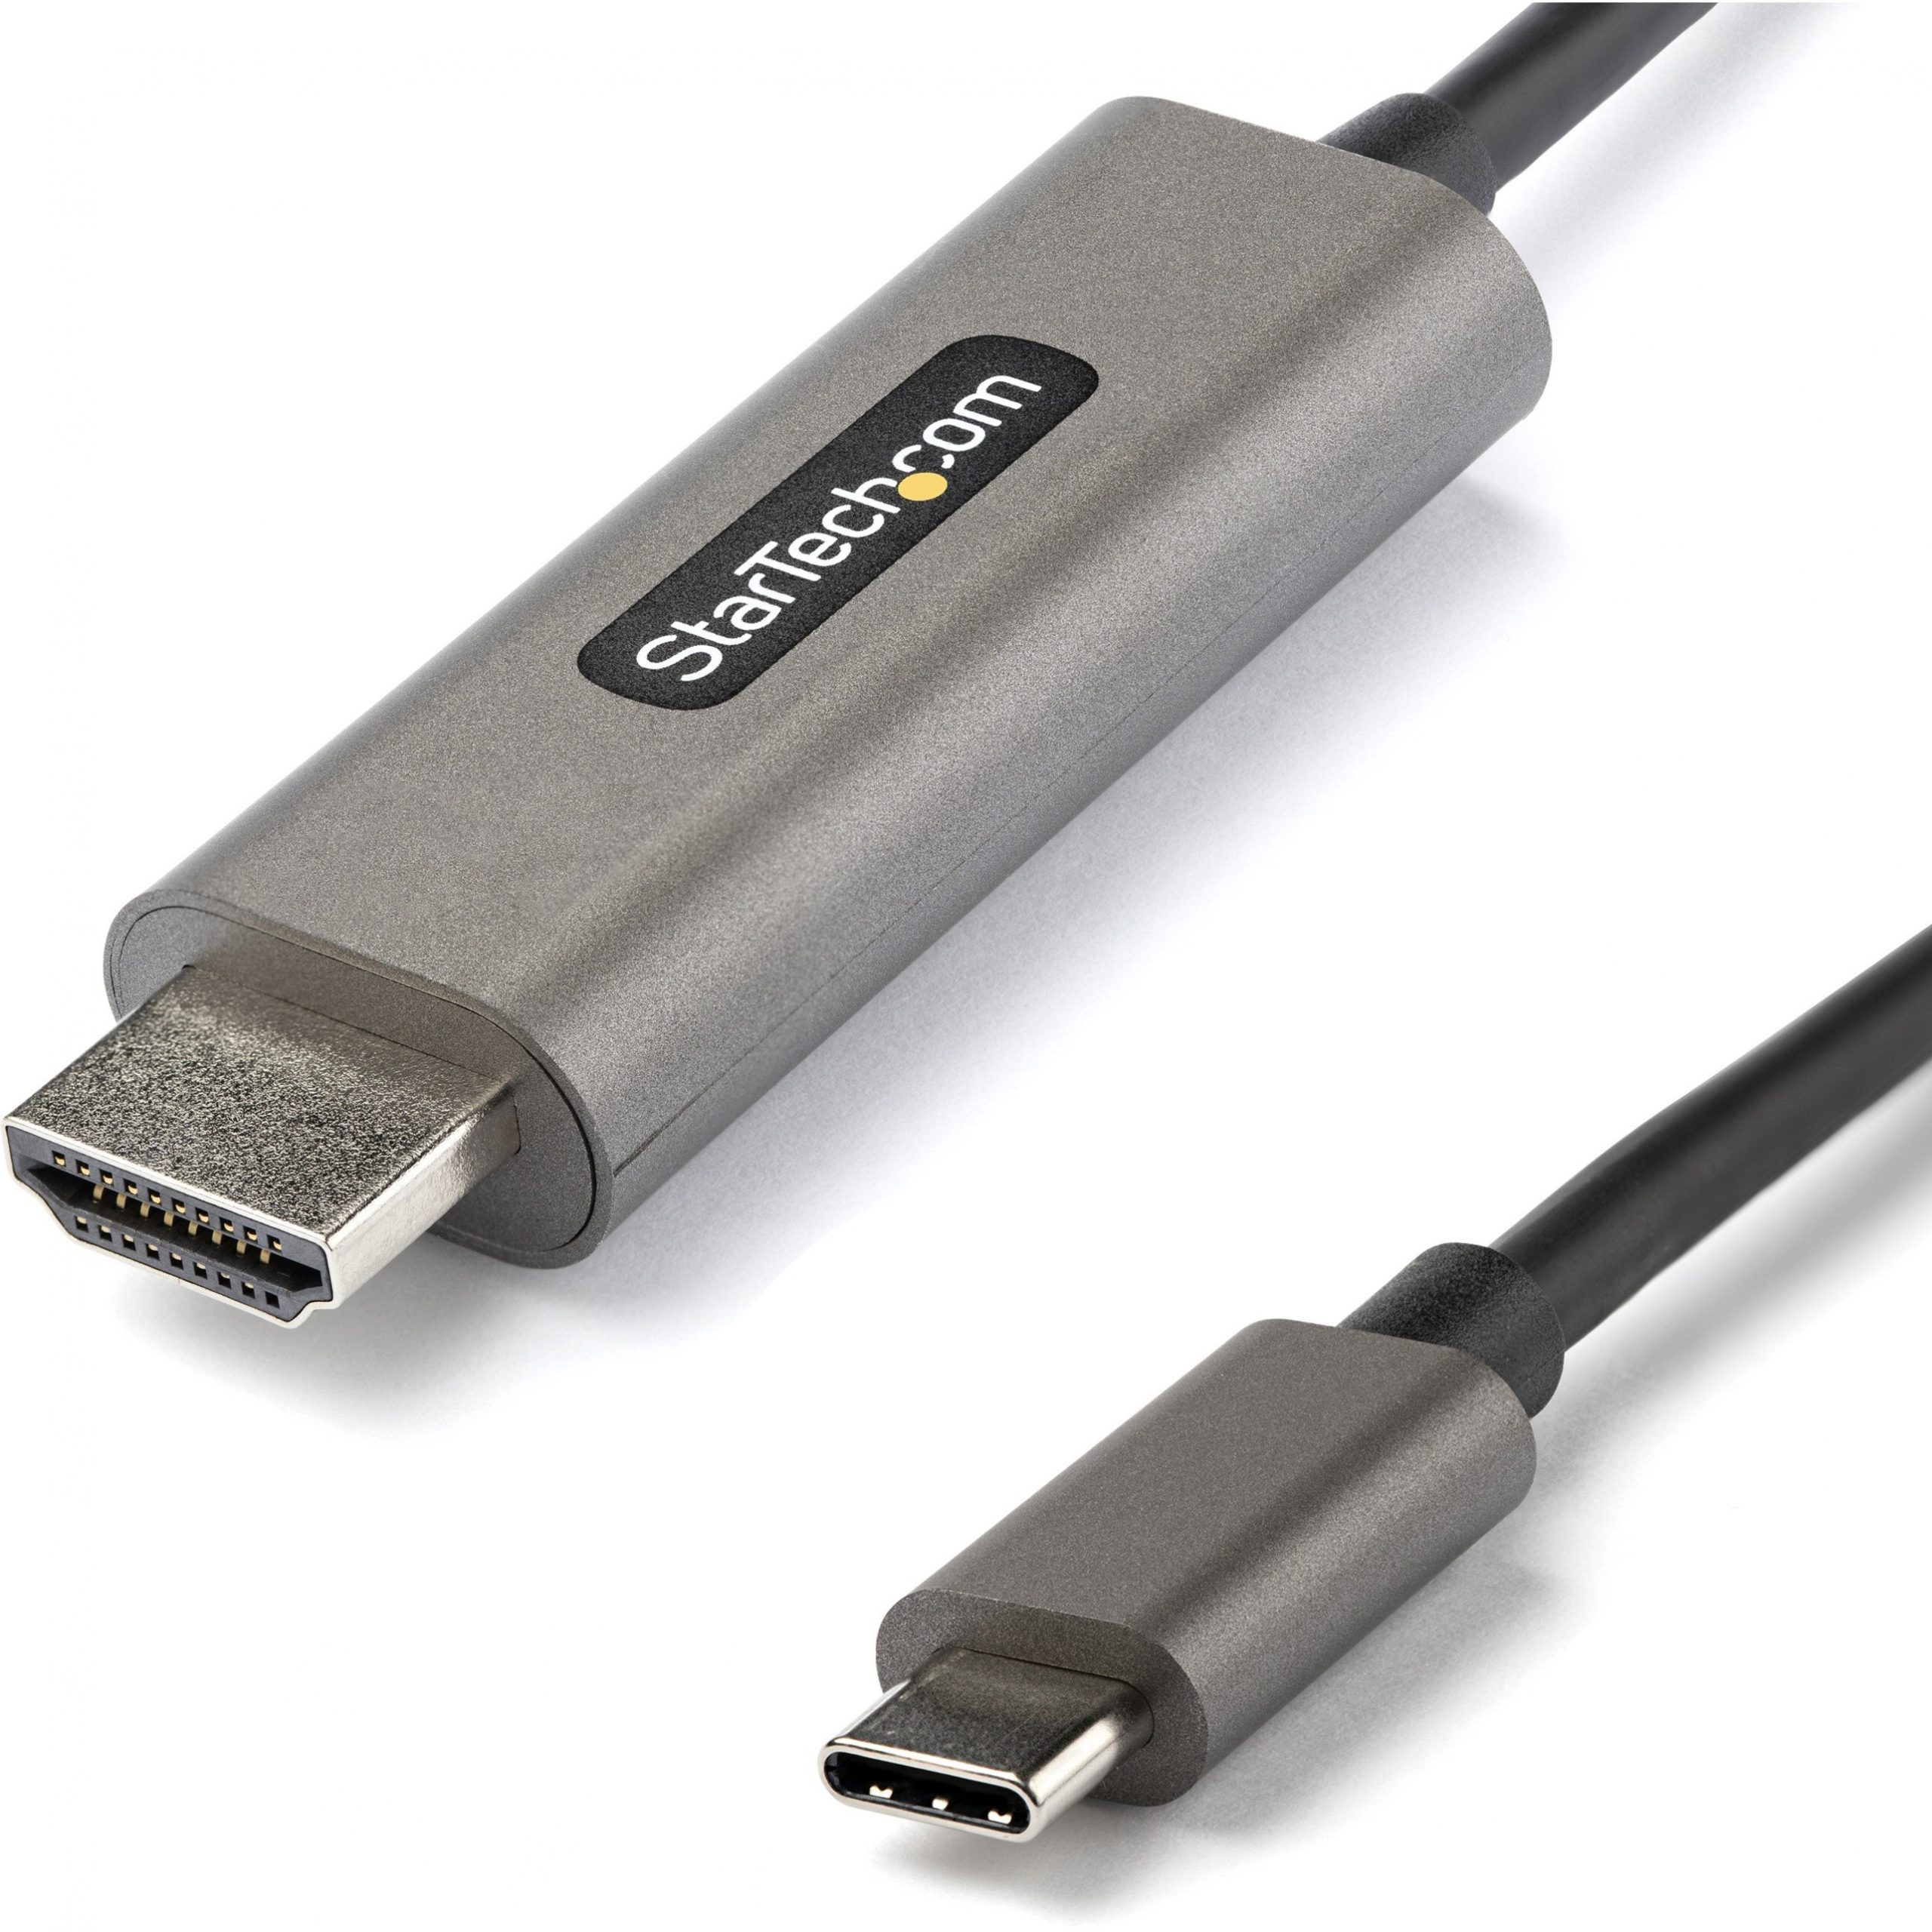 Startech .com 16ft (5m) USB C to HDMI Cable 4K 60Hz with HDR10, Ultra HD  USB Type-C to HDMI 2.0b Video Adapter Cable, DP 1.4 Alt Mode HBR3 -  CDP2HDMM5MH - Corporate Armor